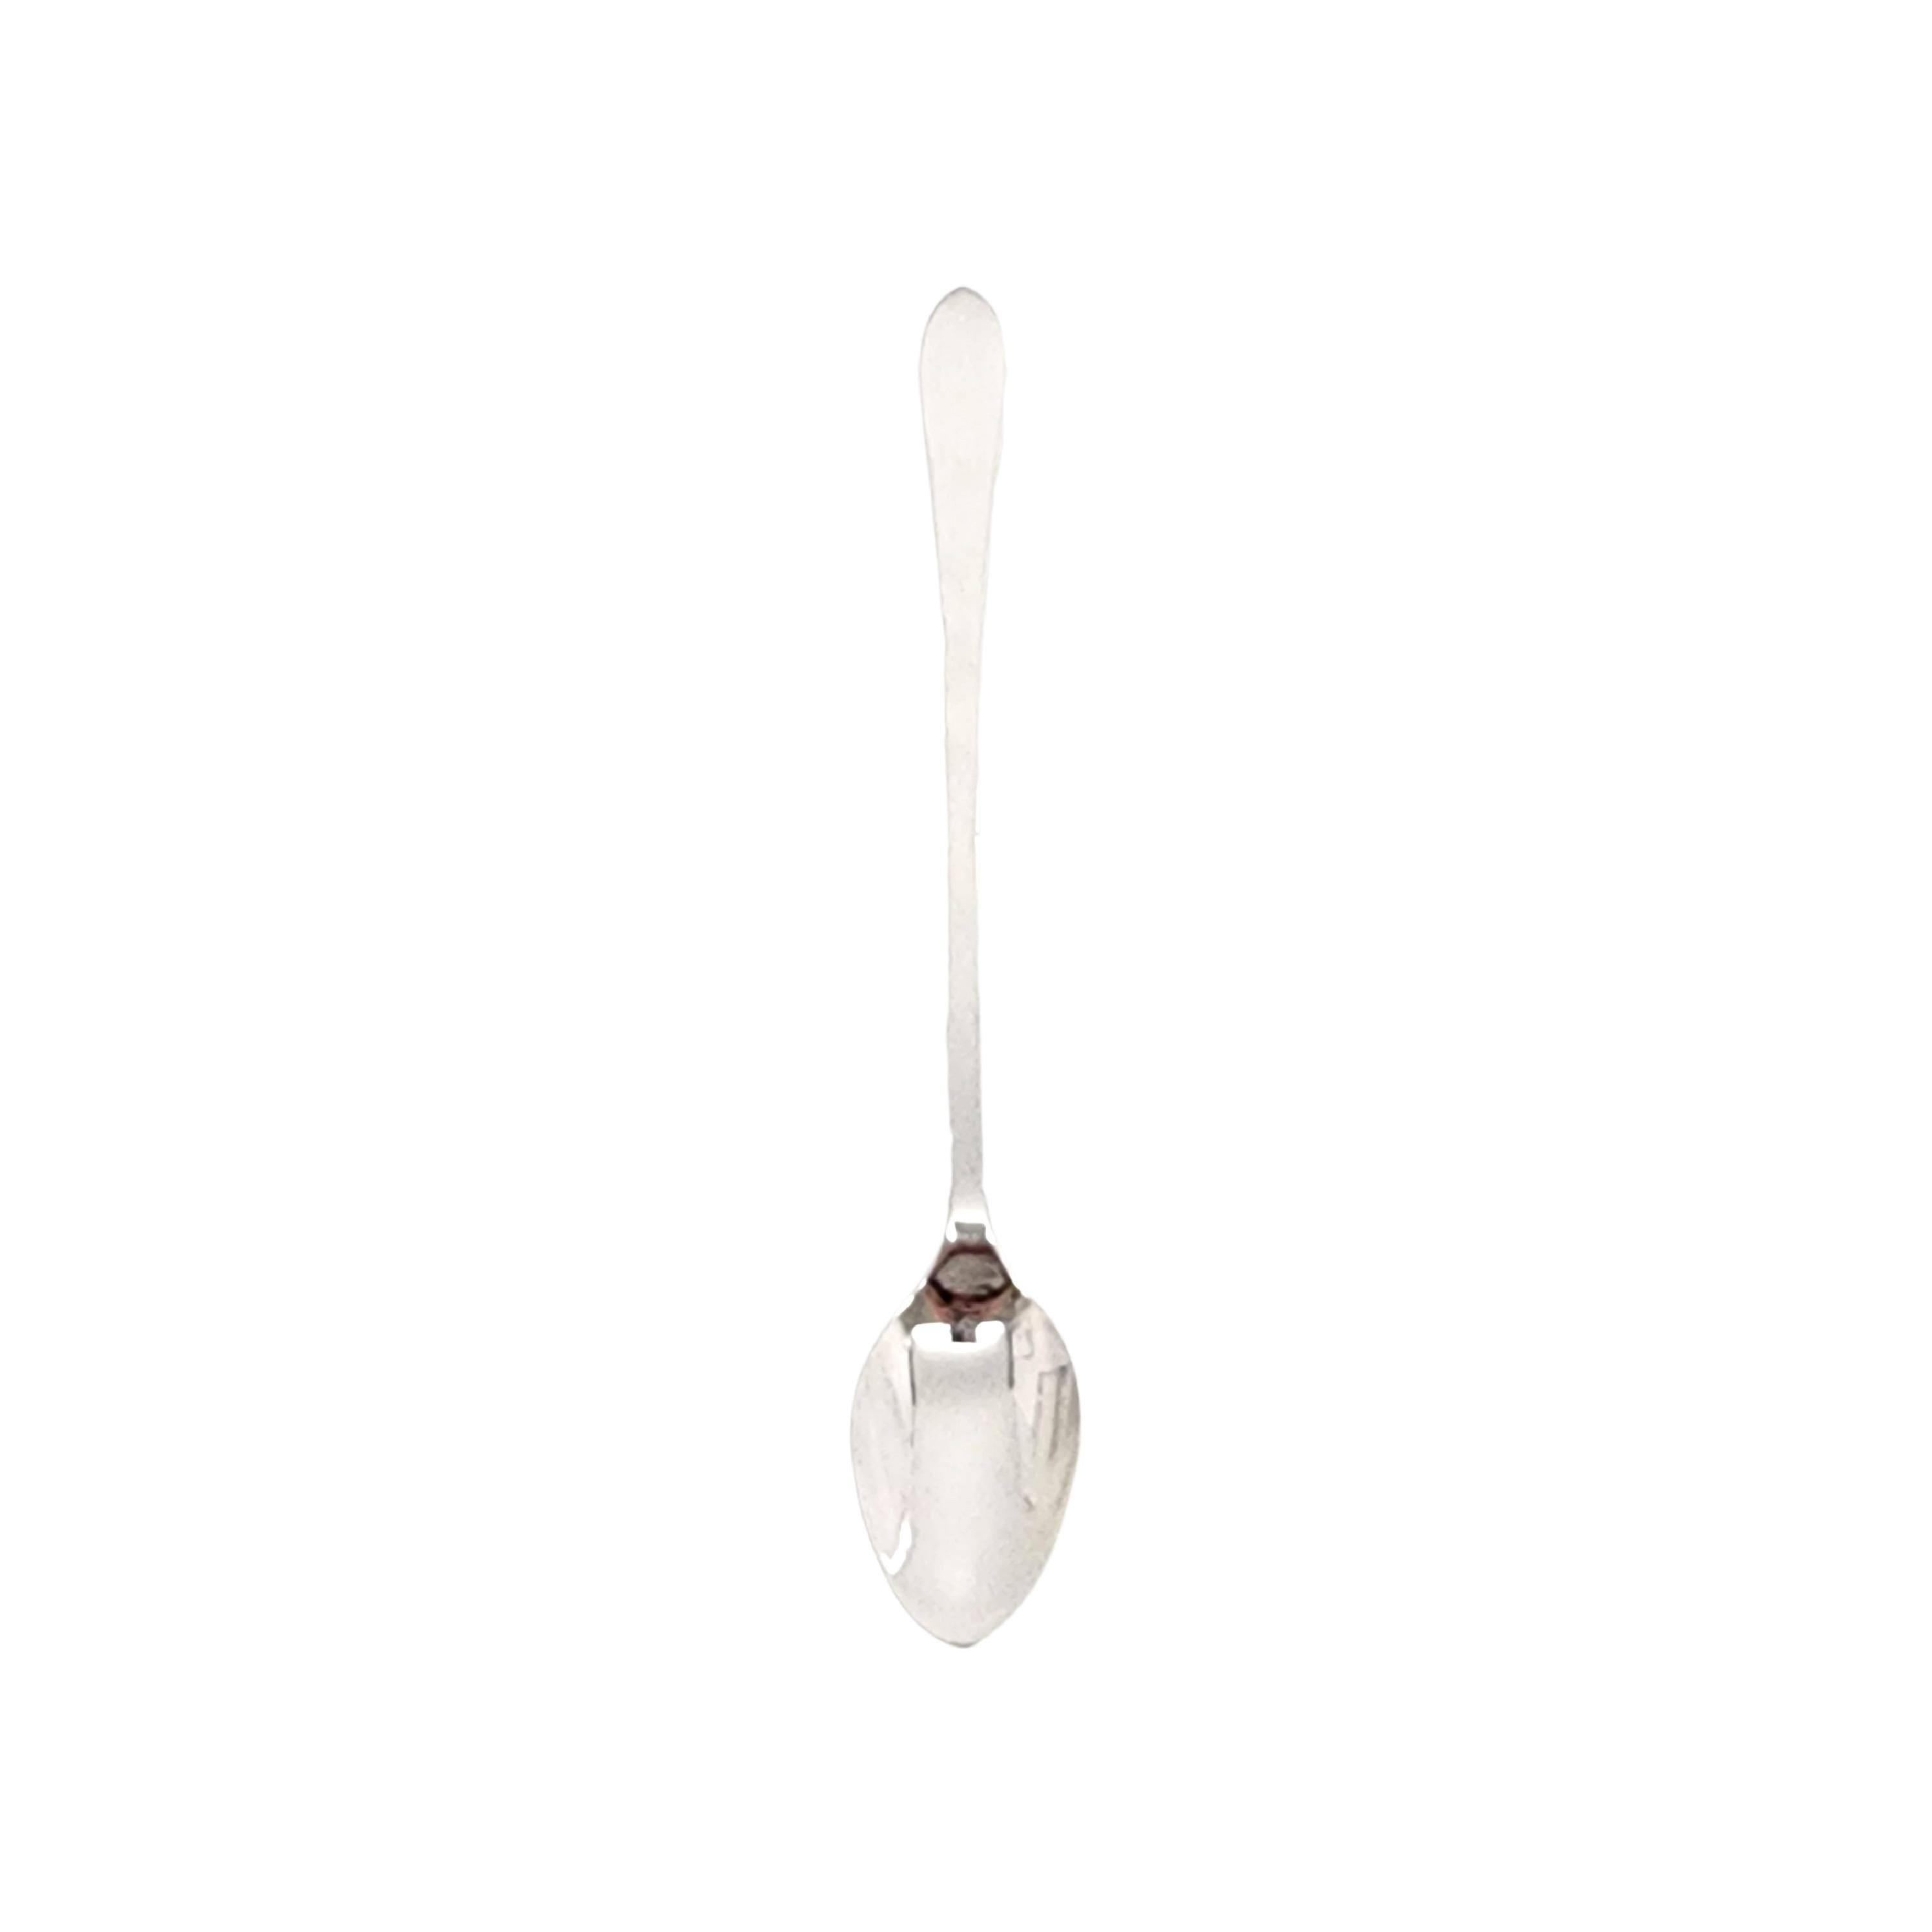 Tiffany & Co. Sterling Silver Faneuil Baby Feeding Spoon with Pouch 2